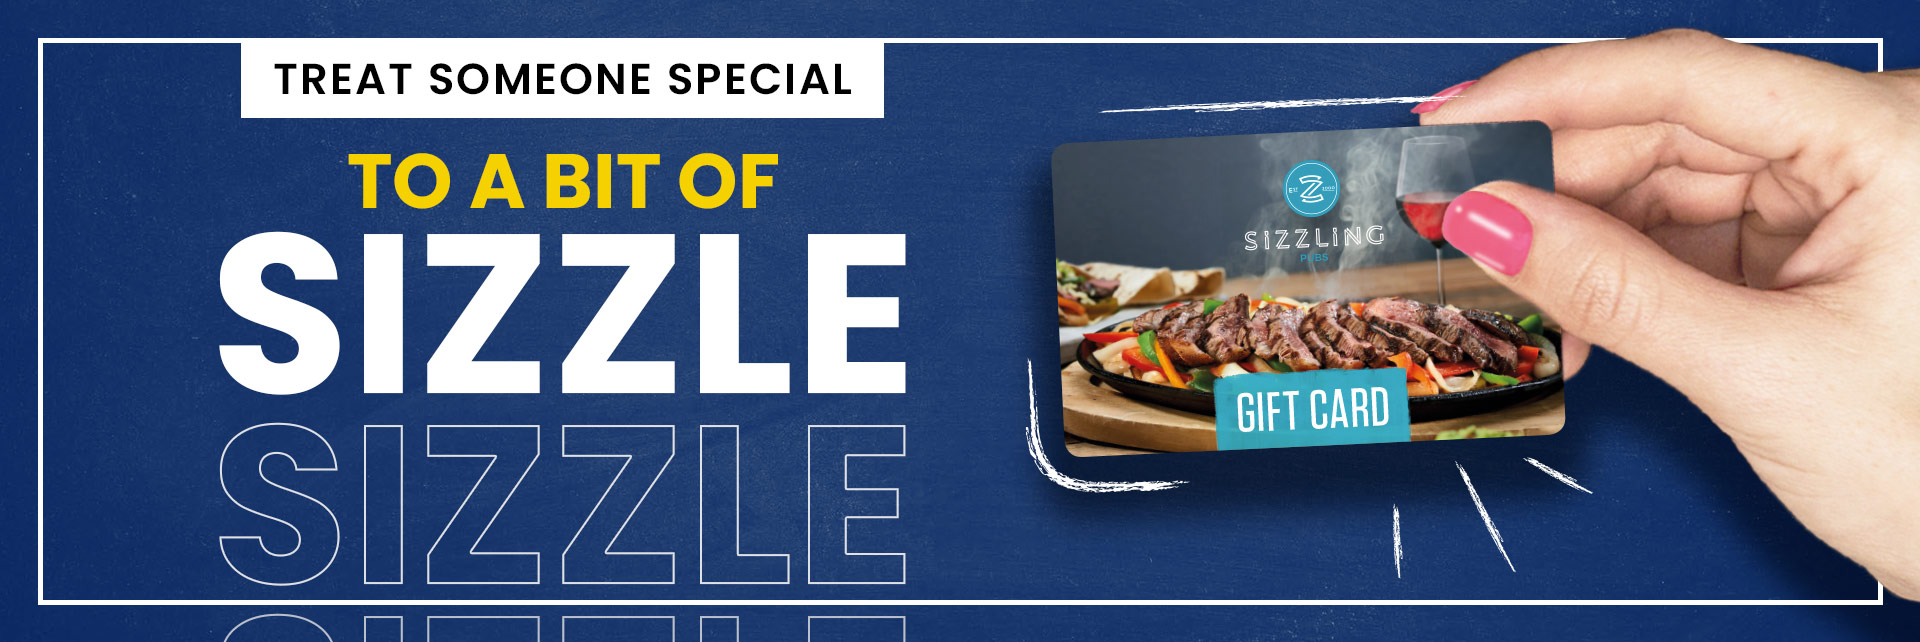 Sizzling Pubs Gift Card at The Gate Inn in Mexborough